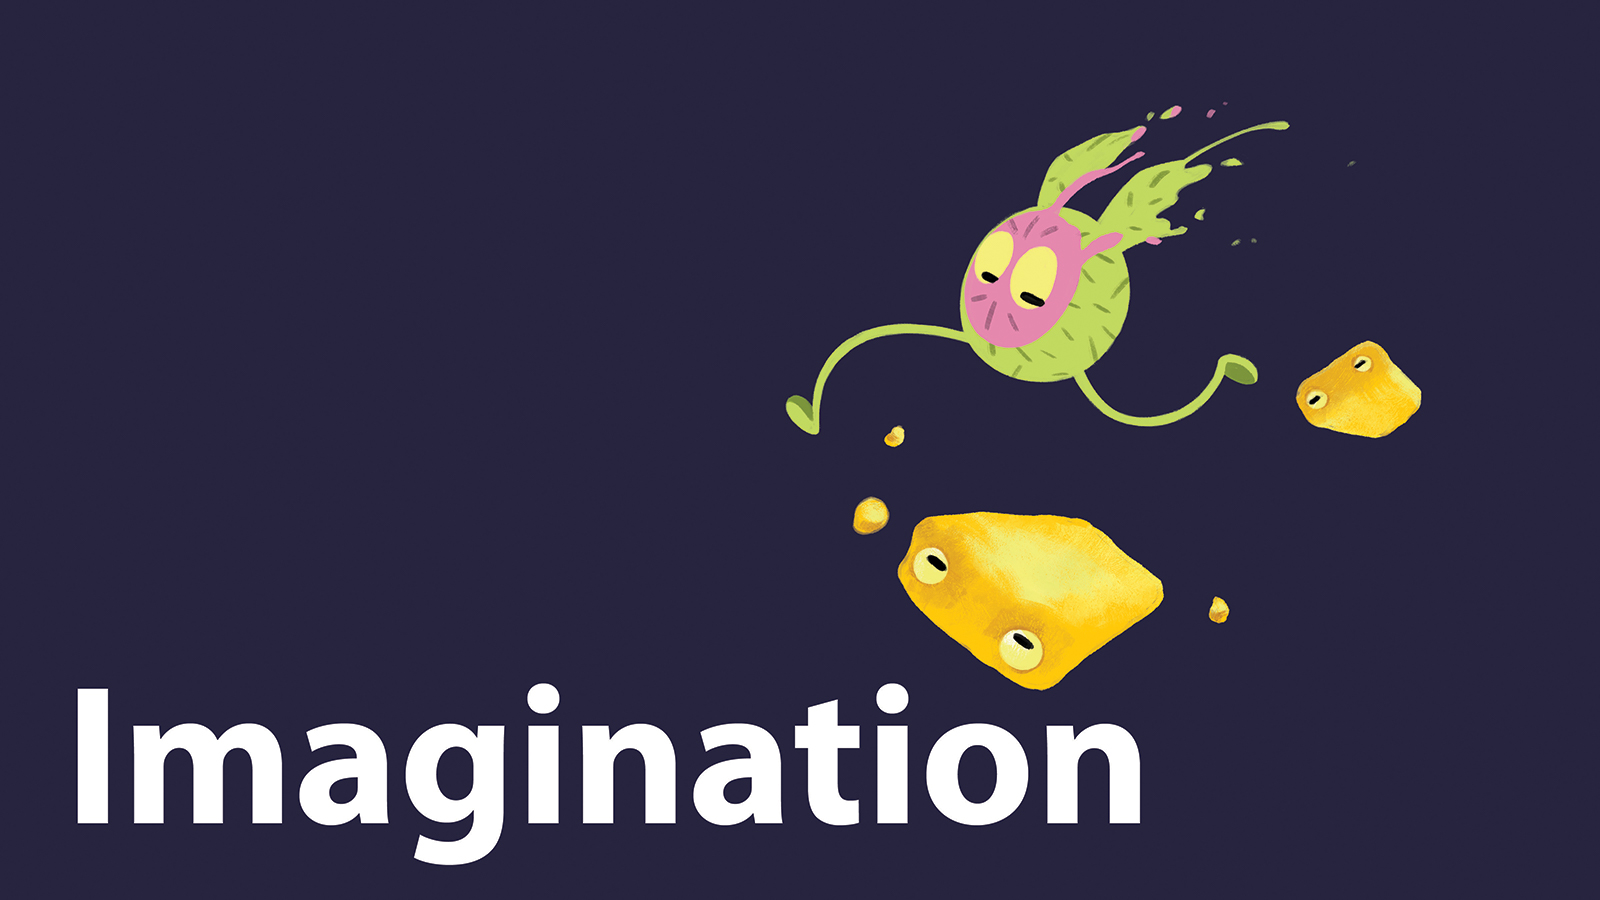 Slide with fantastical imaginary characters and the word "imagination."